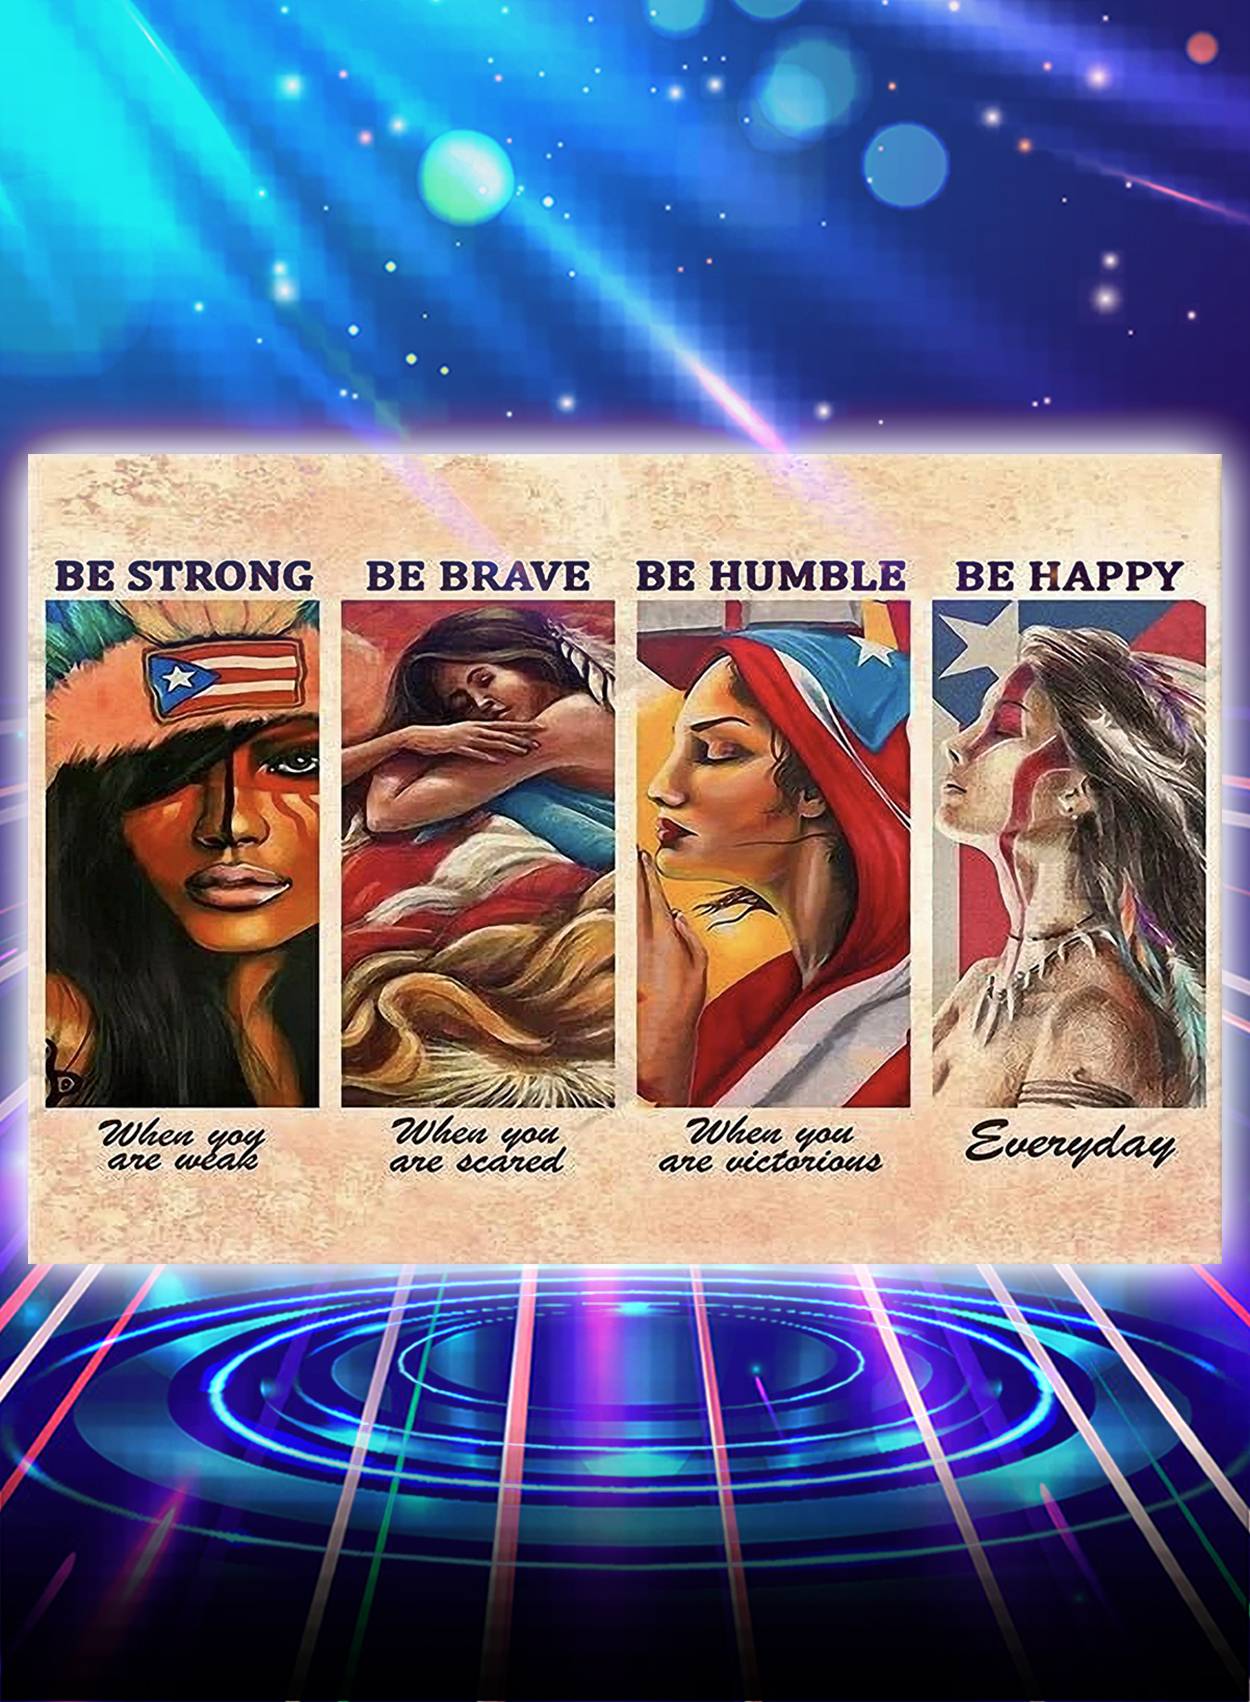 Puerto rico girls be strong be brave be humble be happy poster - A2